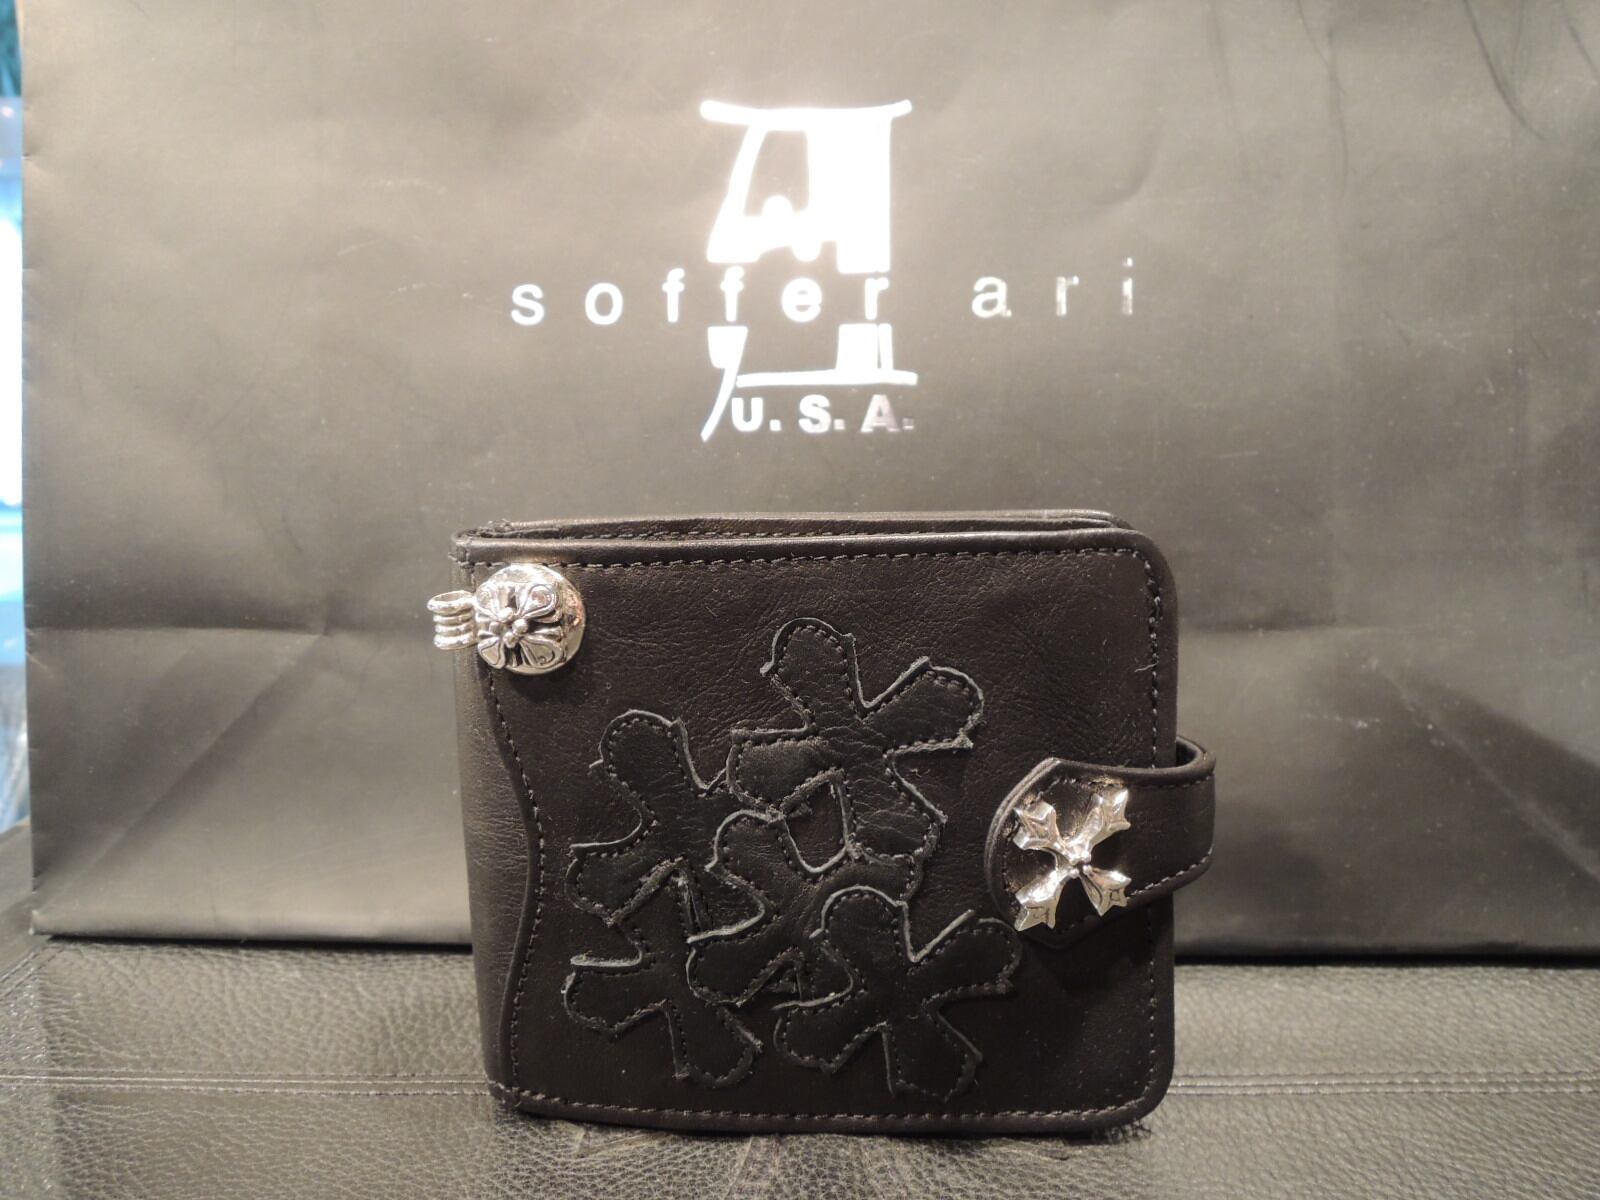 SofferAri / ソファーアリsamw　S.A. WALLET WITH N.C. BADGE CLACK WALLET CHAIN  JUNCTION  BLACK / BROWN / CAMO LEATHER   FirstOrderJewelry  ファーストオーダージュエリー代官山